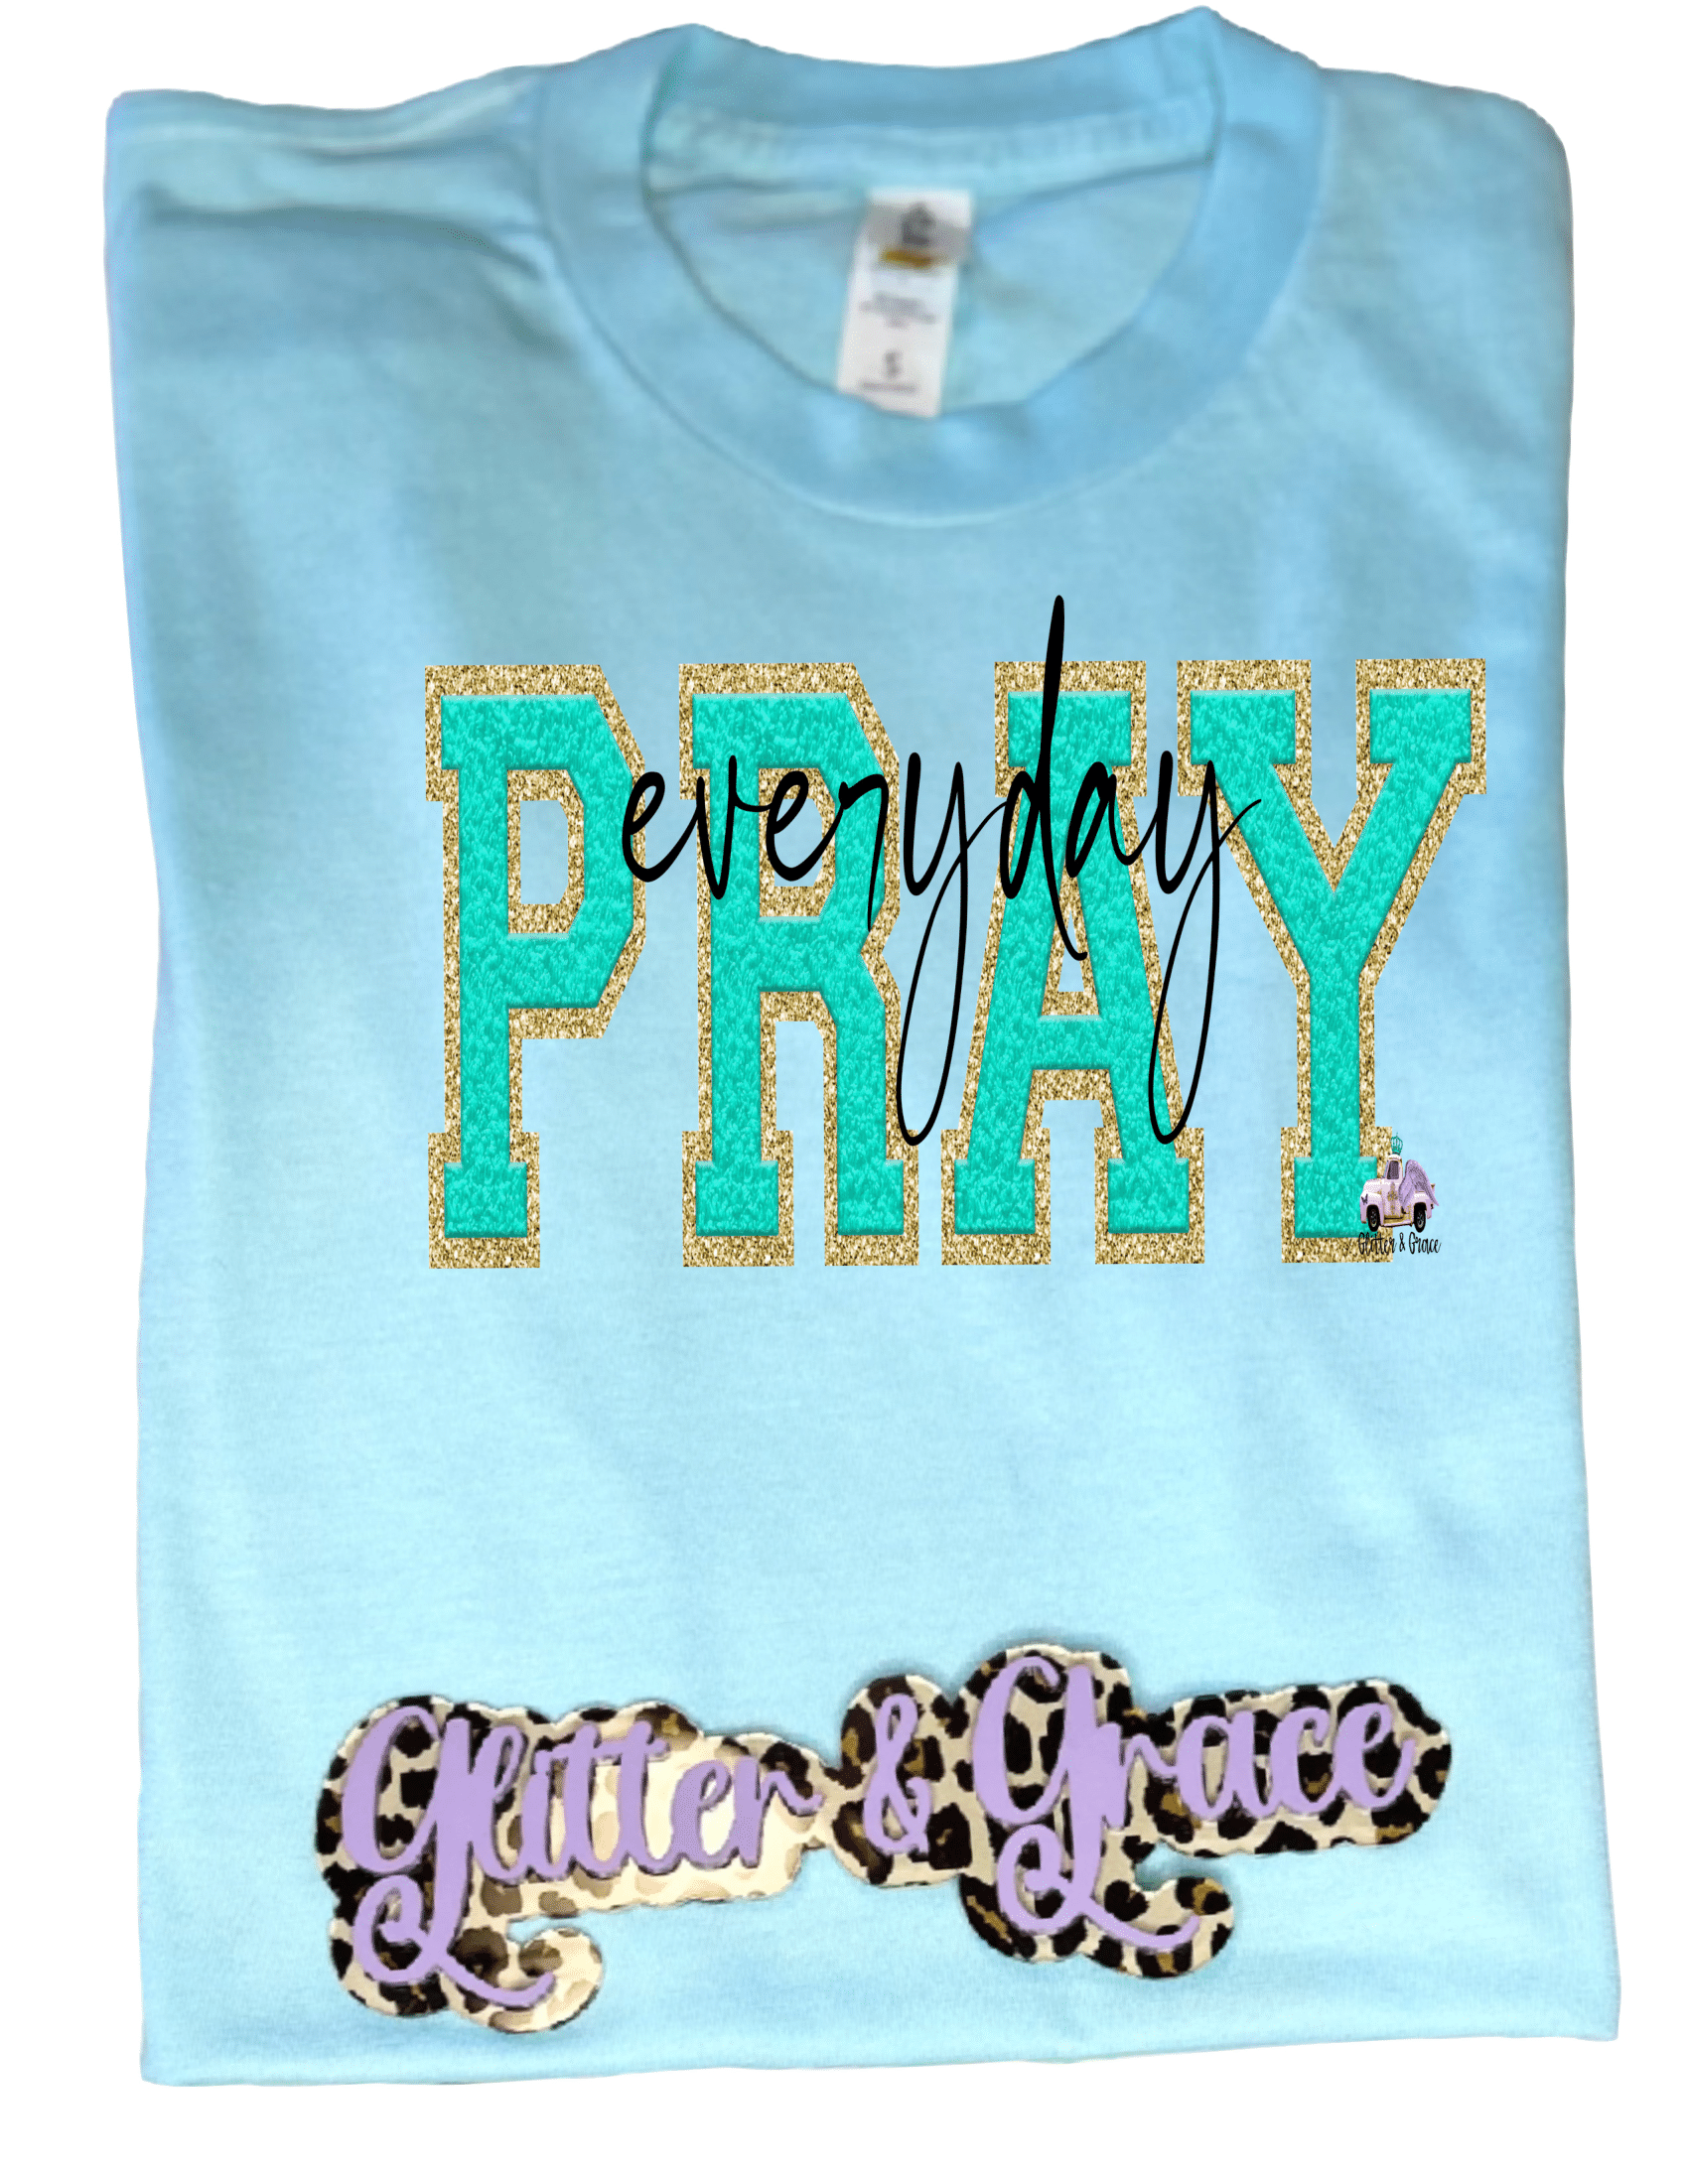 #15 PRAY every day (mint chenille)